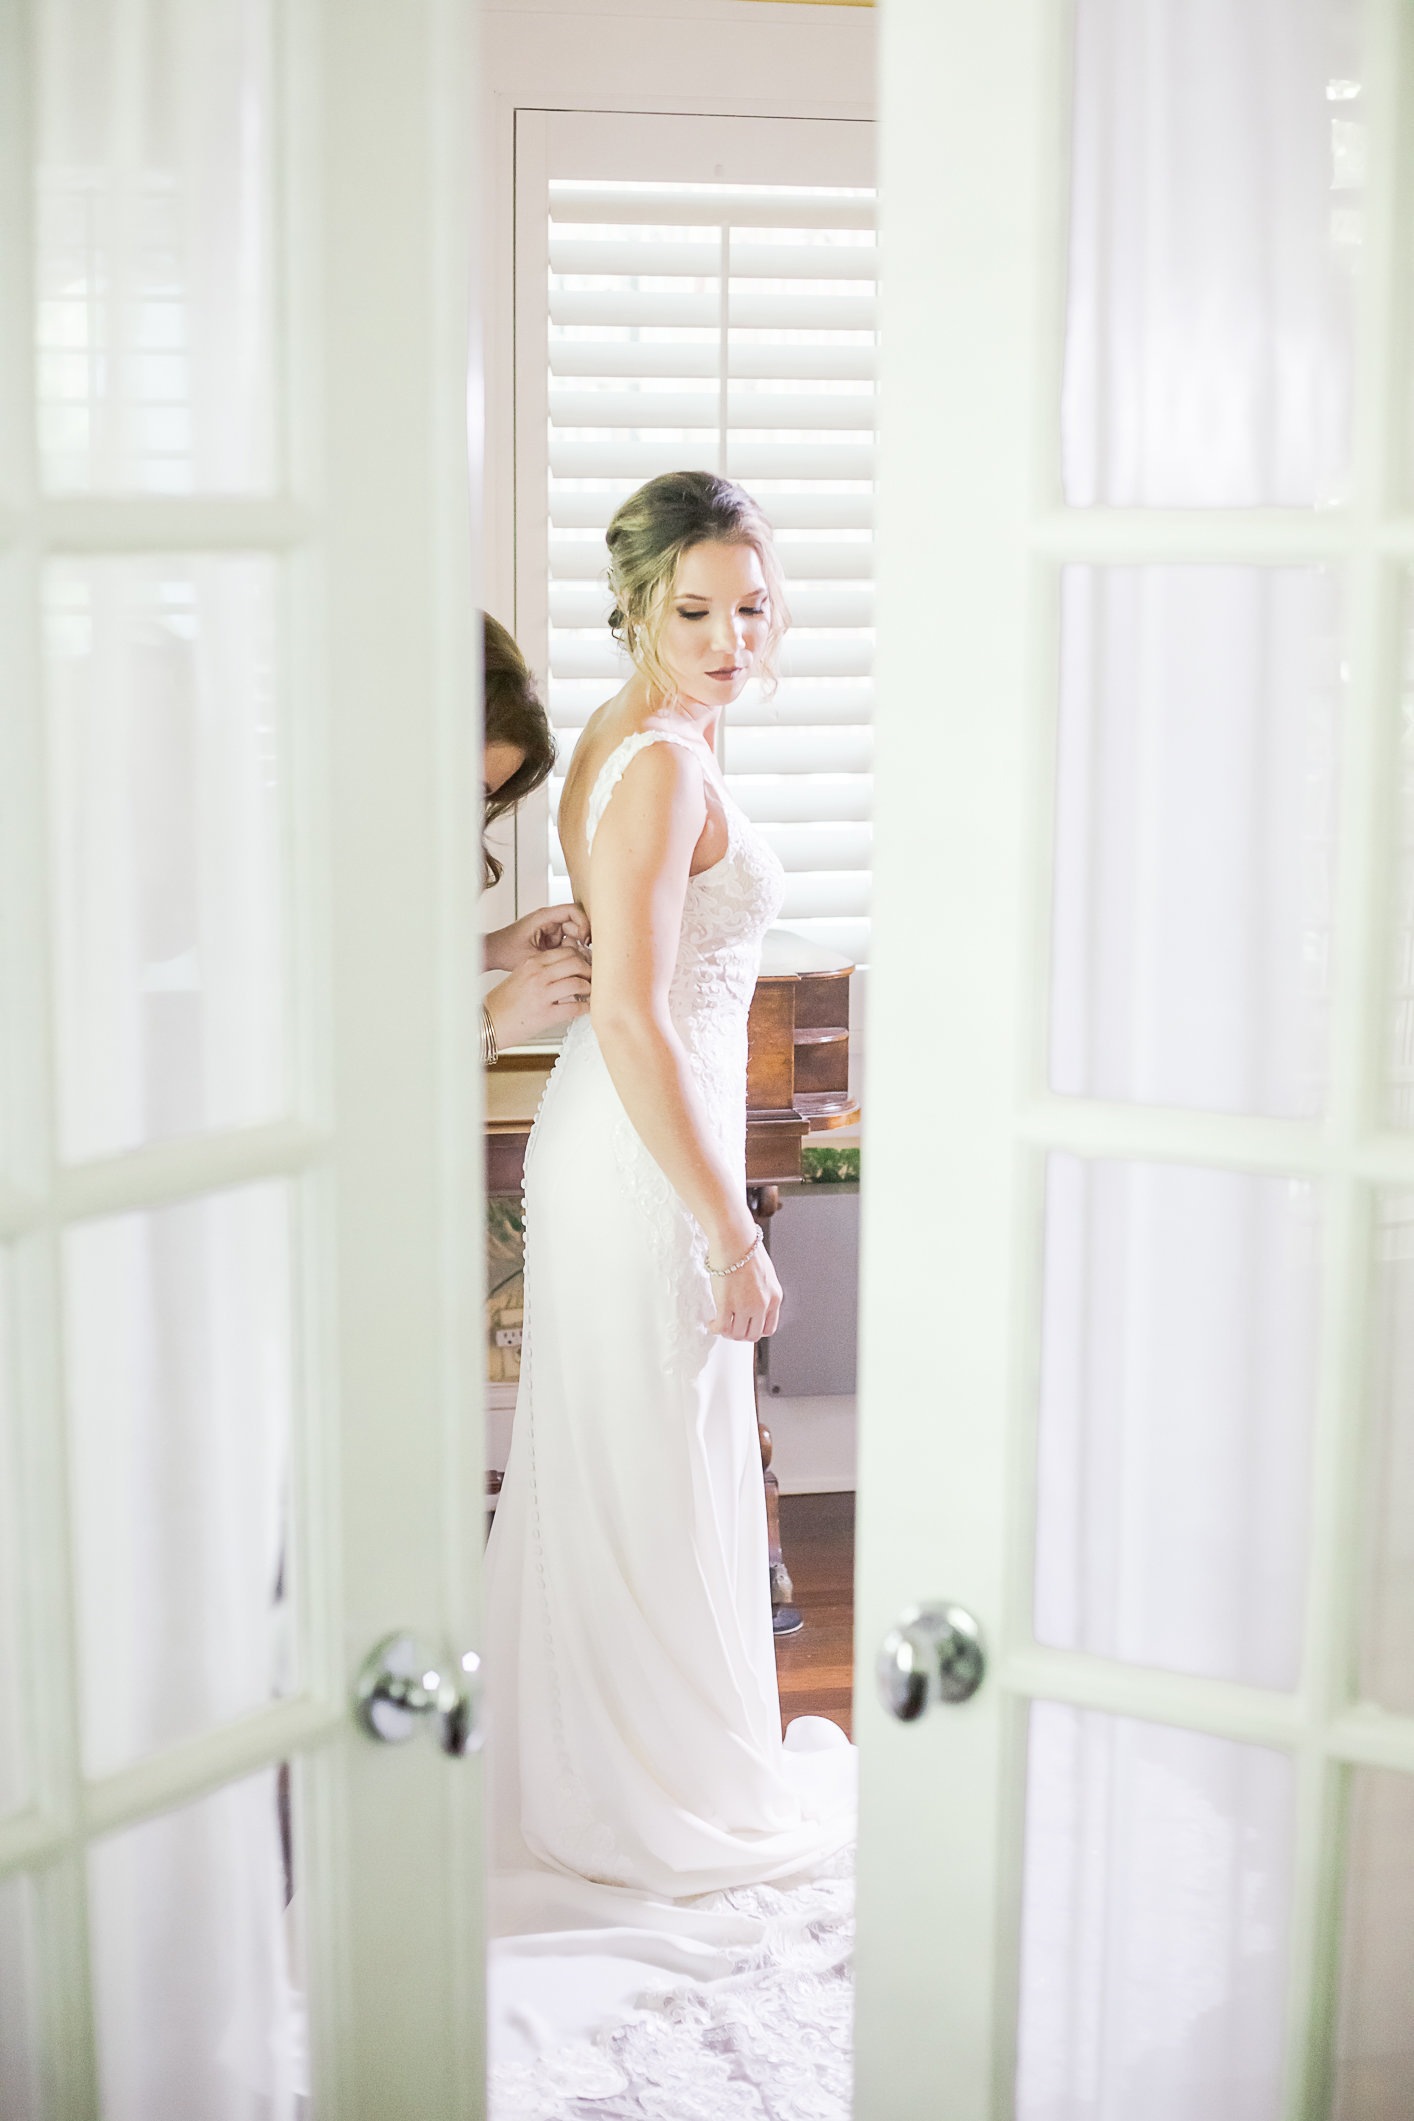 Bride getting ready  - Sundy House by Palm Beach Photography, Inc.